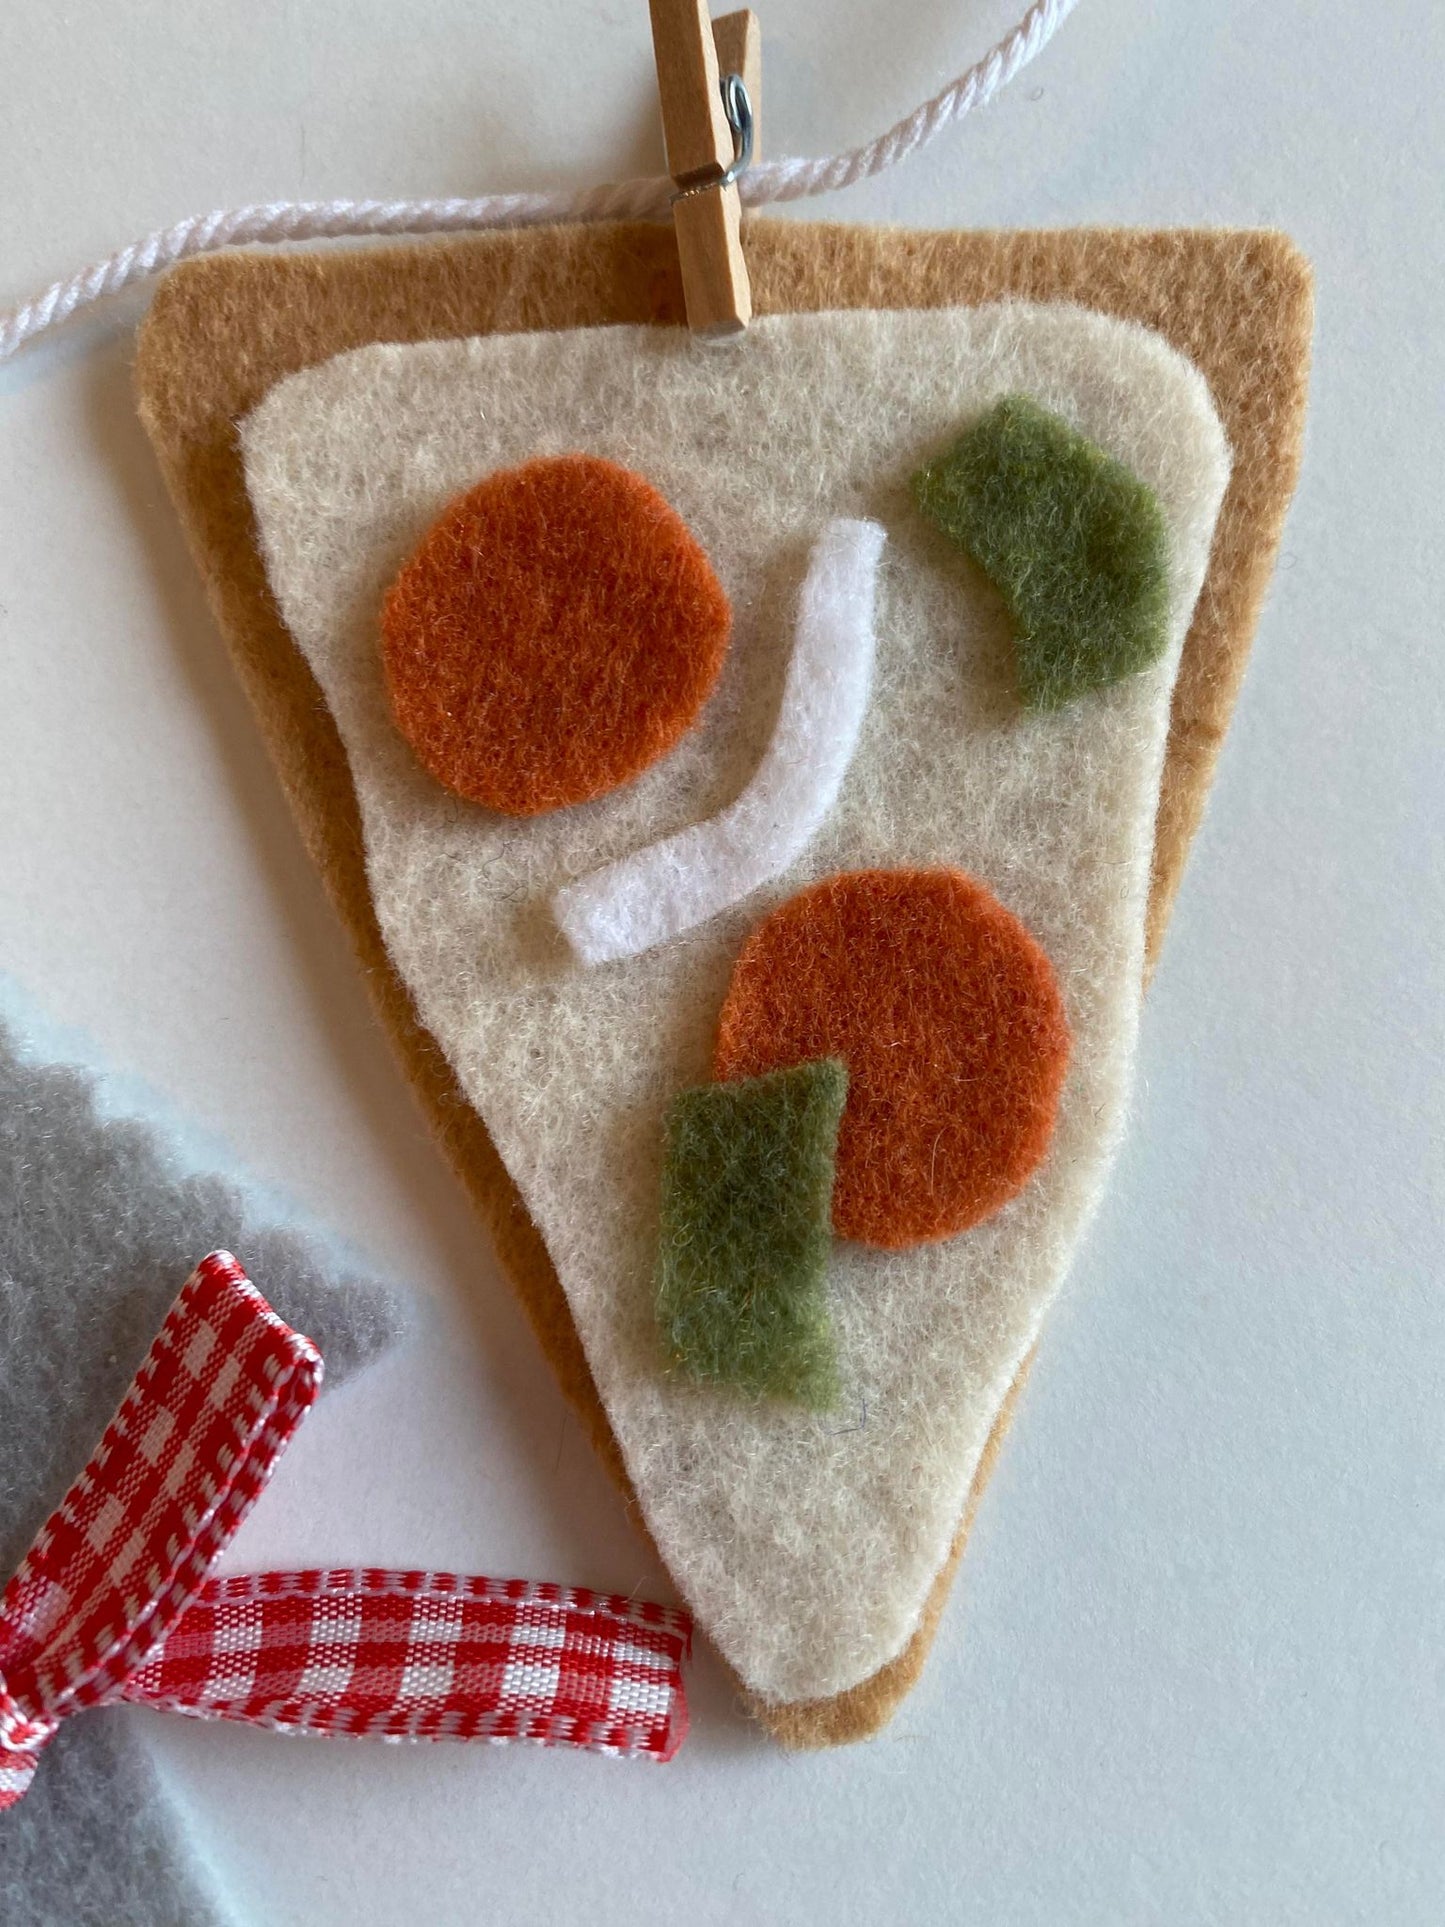 Pizzeria Banner Pizza Chef Garland Restaurant Bunting Felt Wall Hanging Decoration for Pizza Lovers